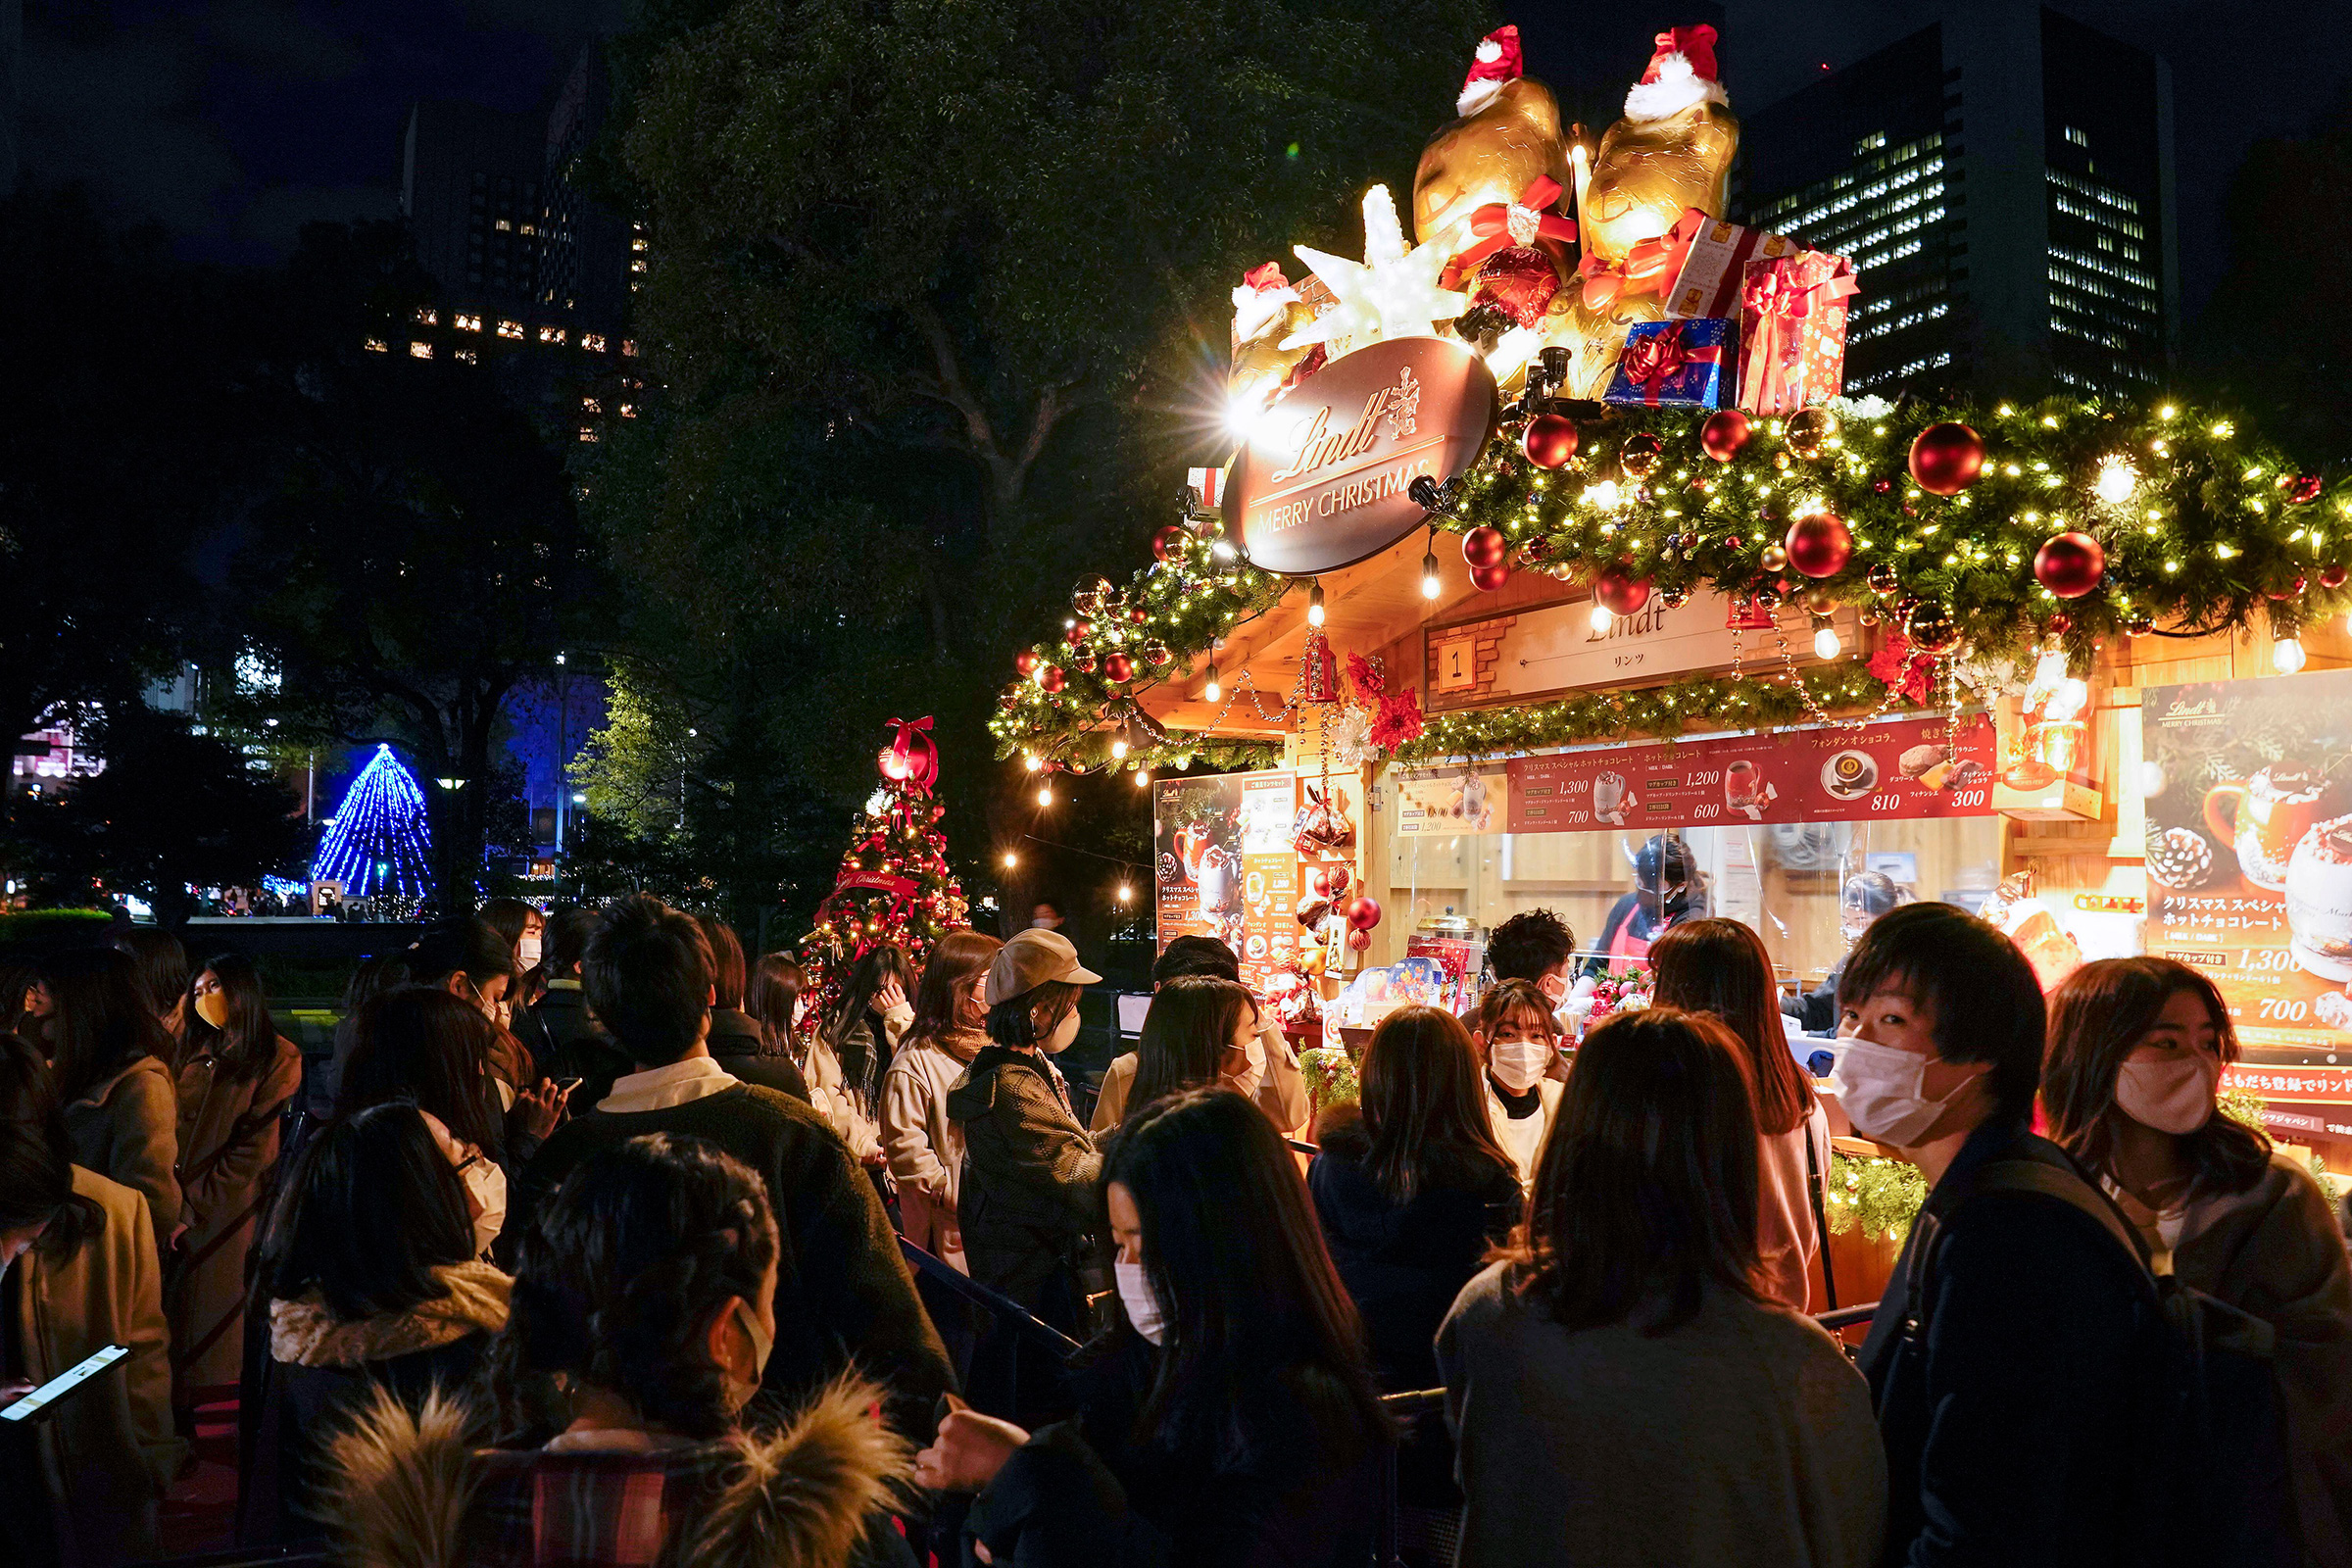 Visitors wearing protective masks enjoy their time at a Christmas market in Tokyo on Dec. 16 after Tokyo government announced it marked its highest record of 678 new COVID-19 infection cases in a day (Kimimasa Mayama—EPA-EFE/Shutterstock)